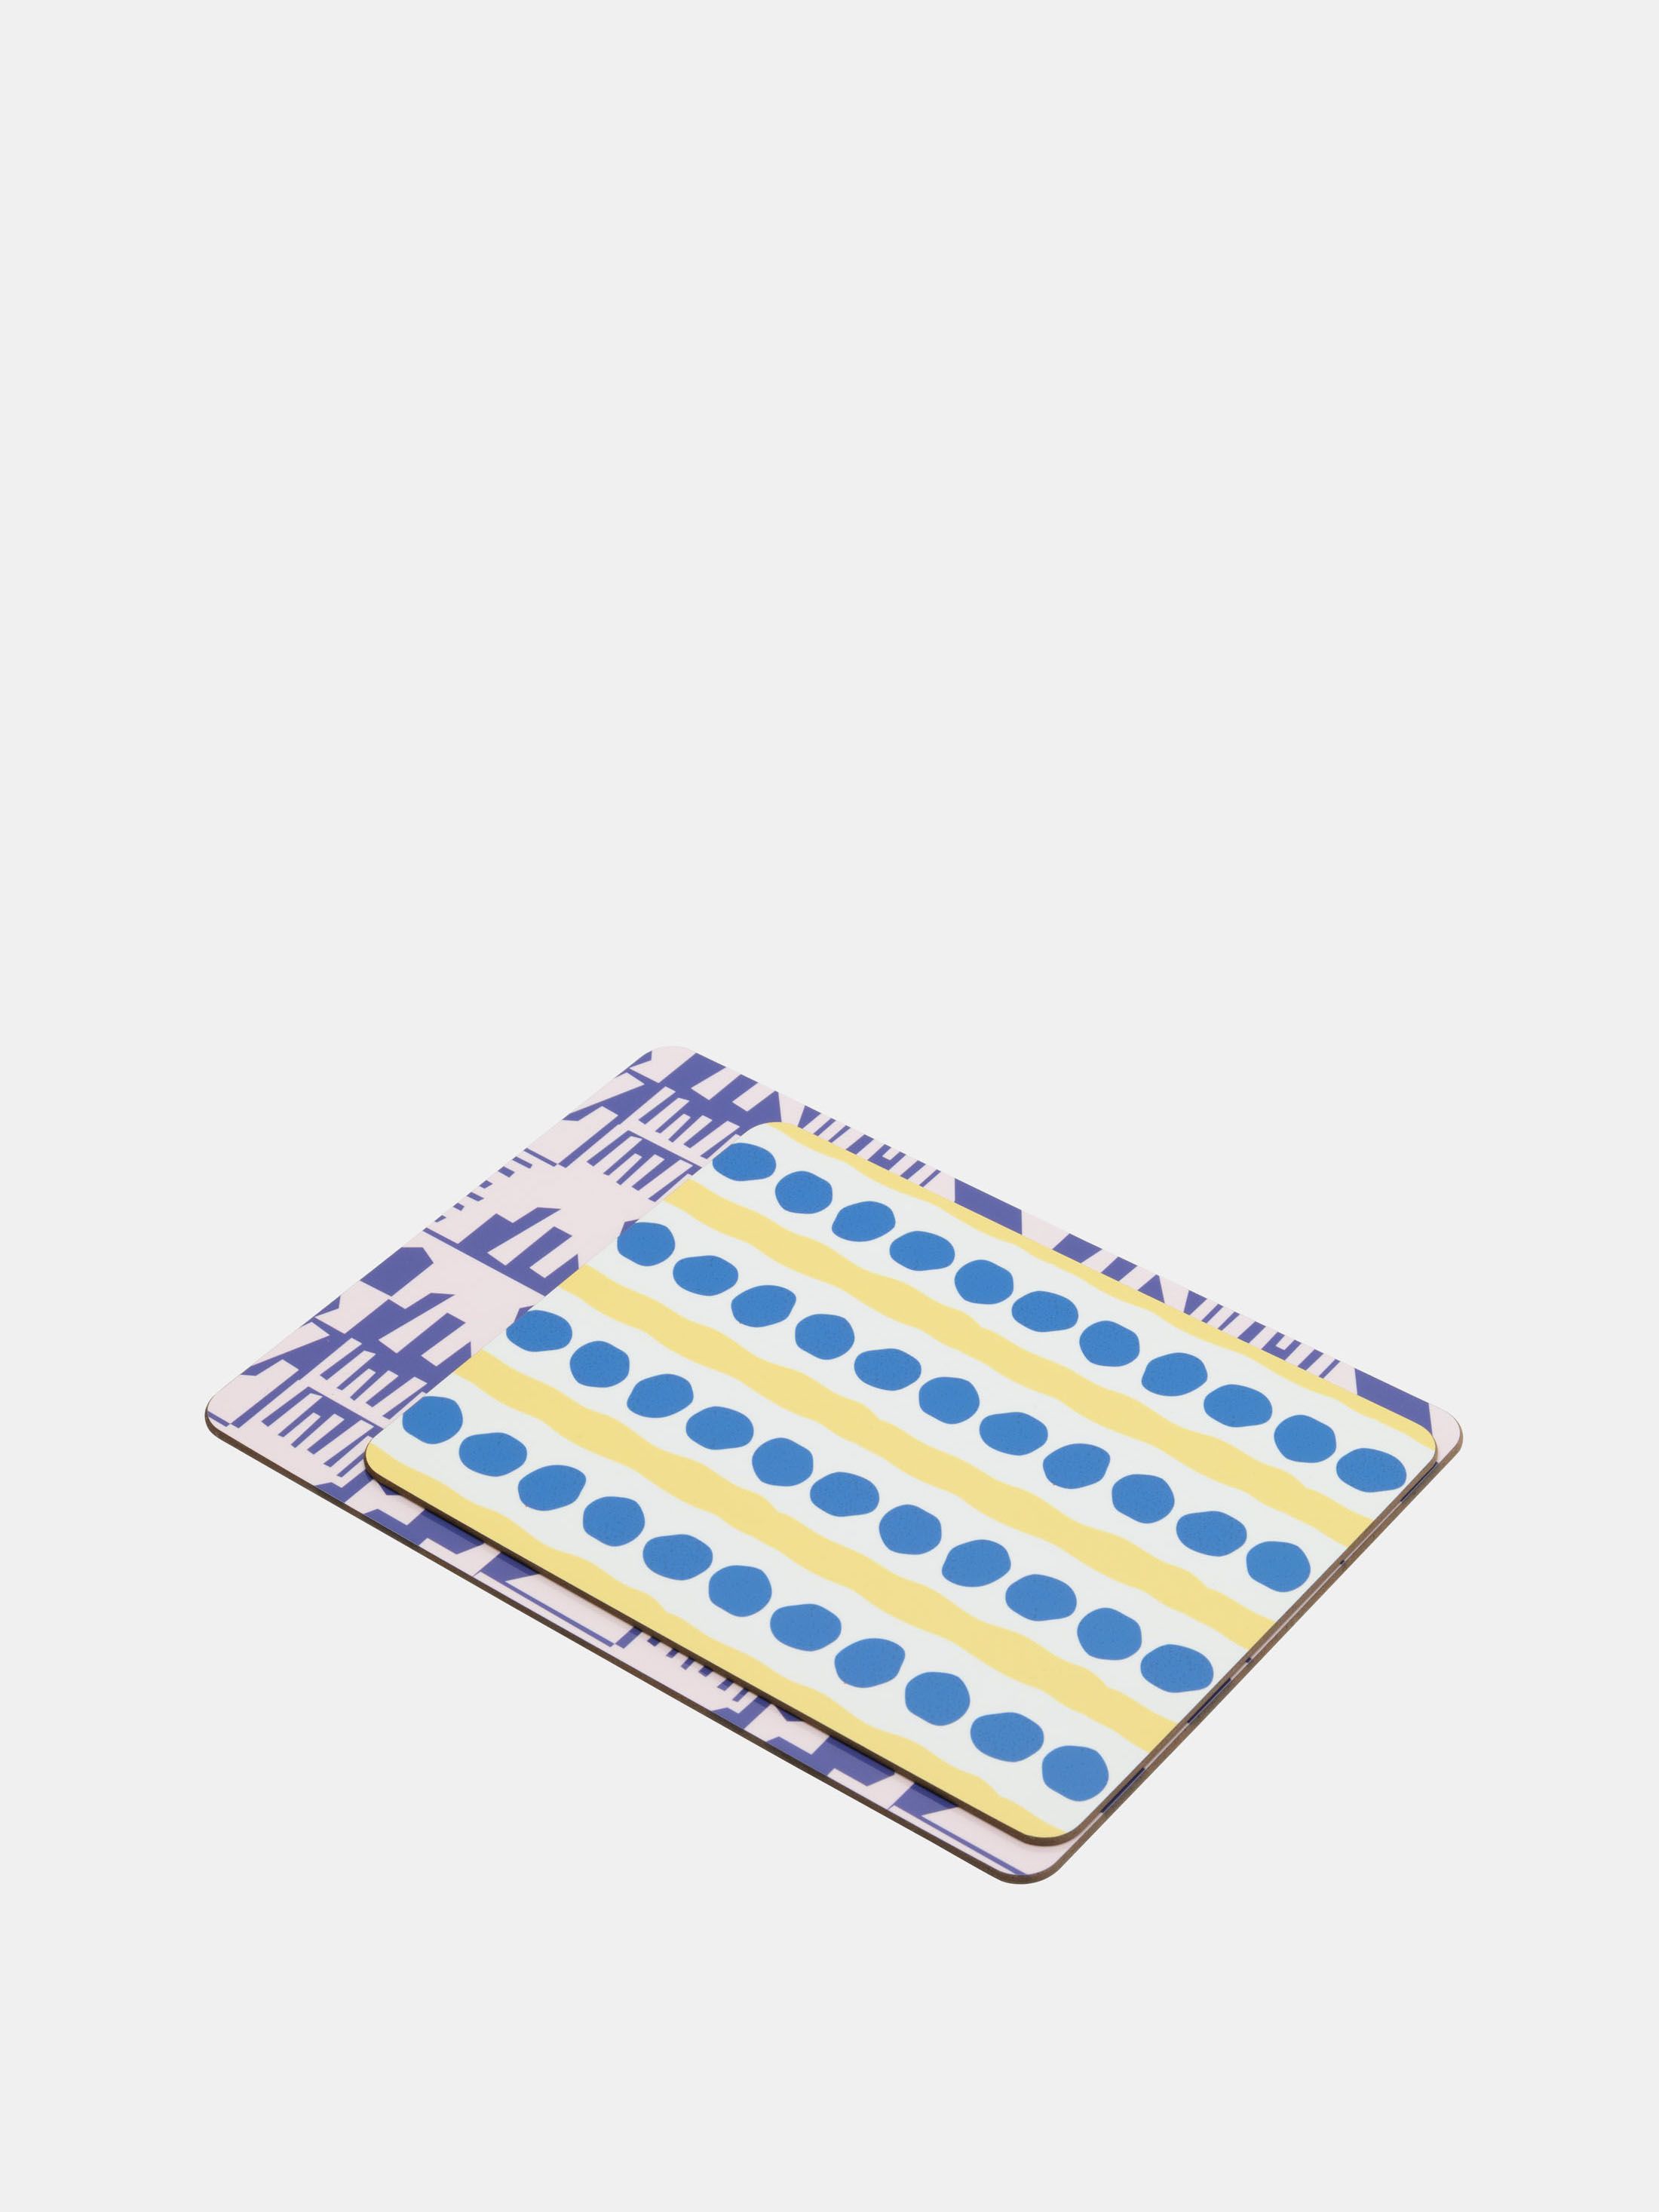 printed placemats with blue and yellow pattern